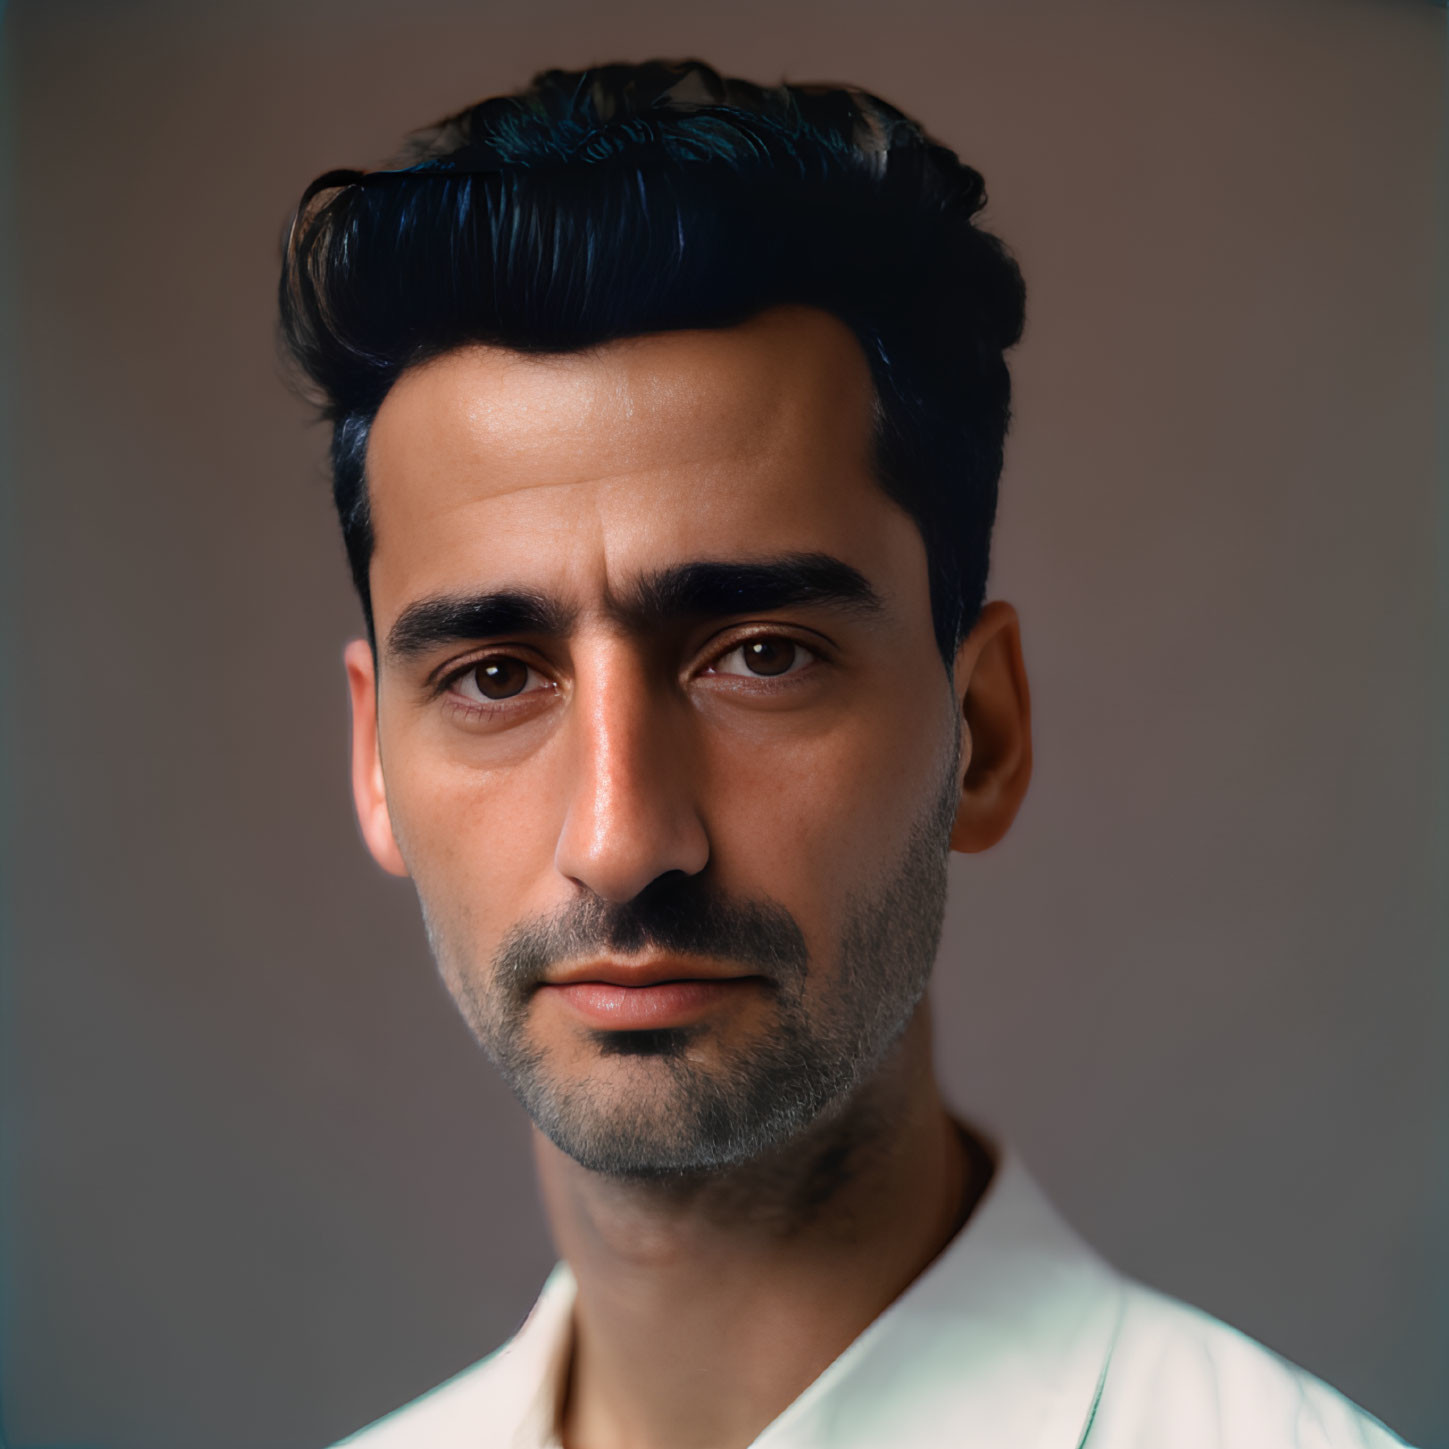 Serious man portrait with styled dark hair and short beard